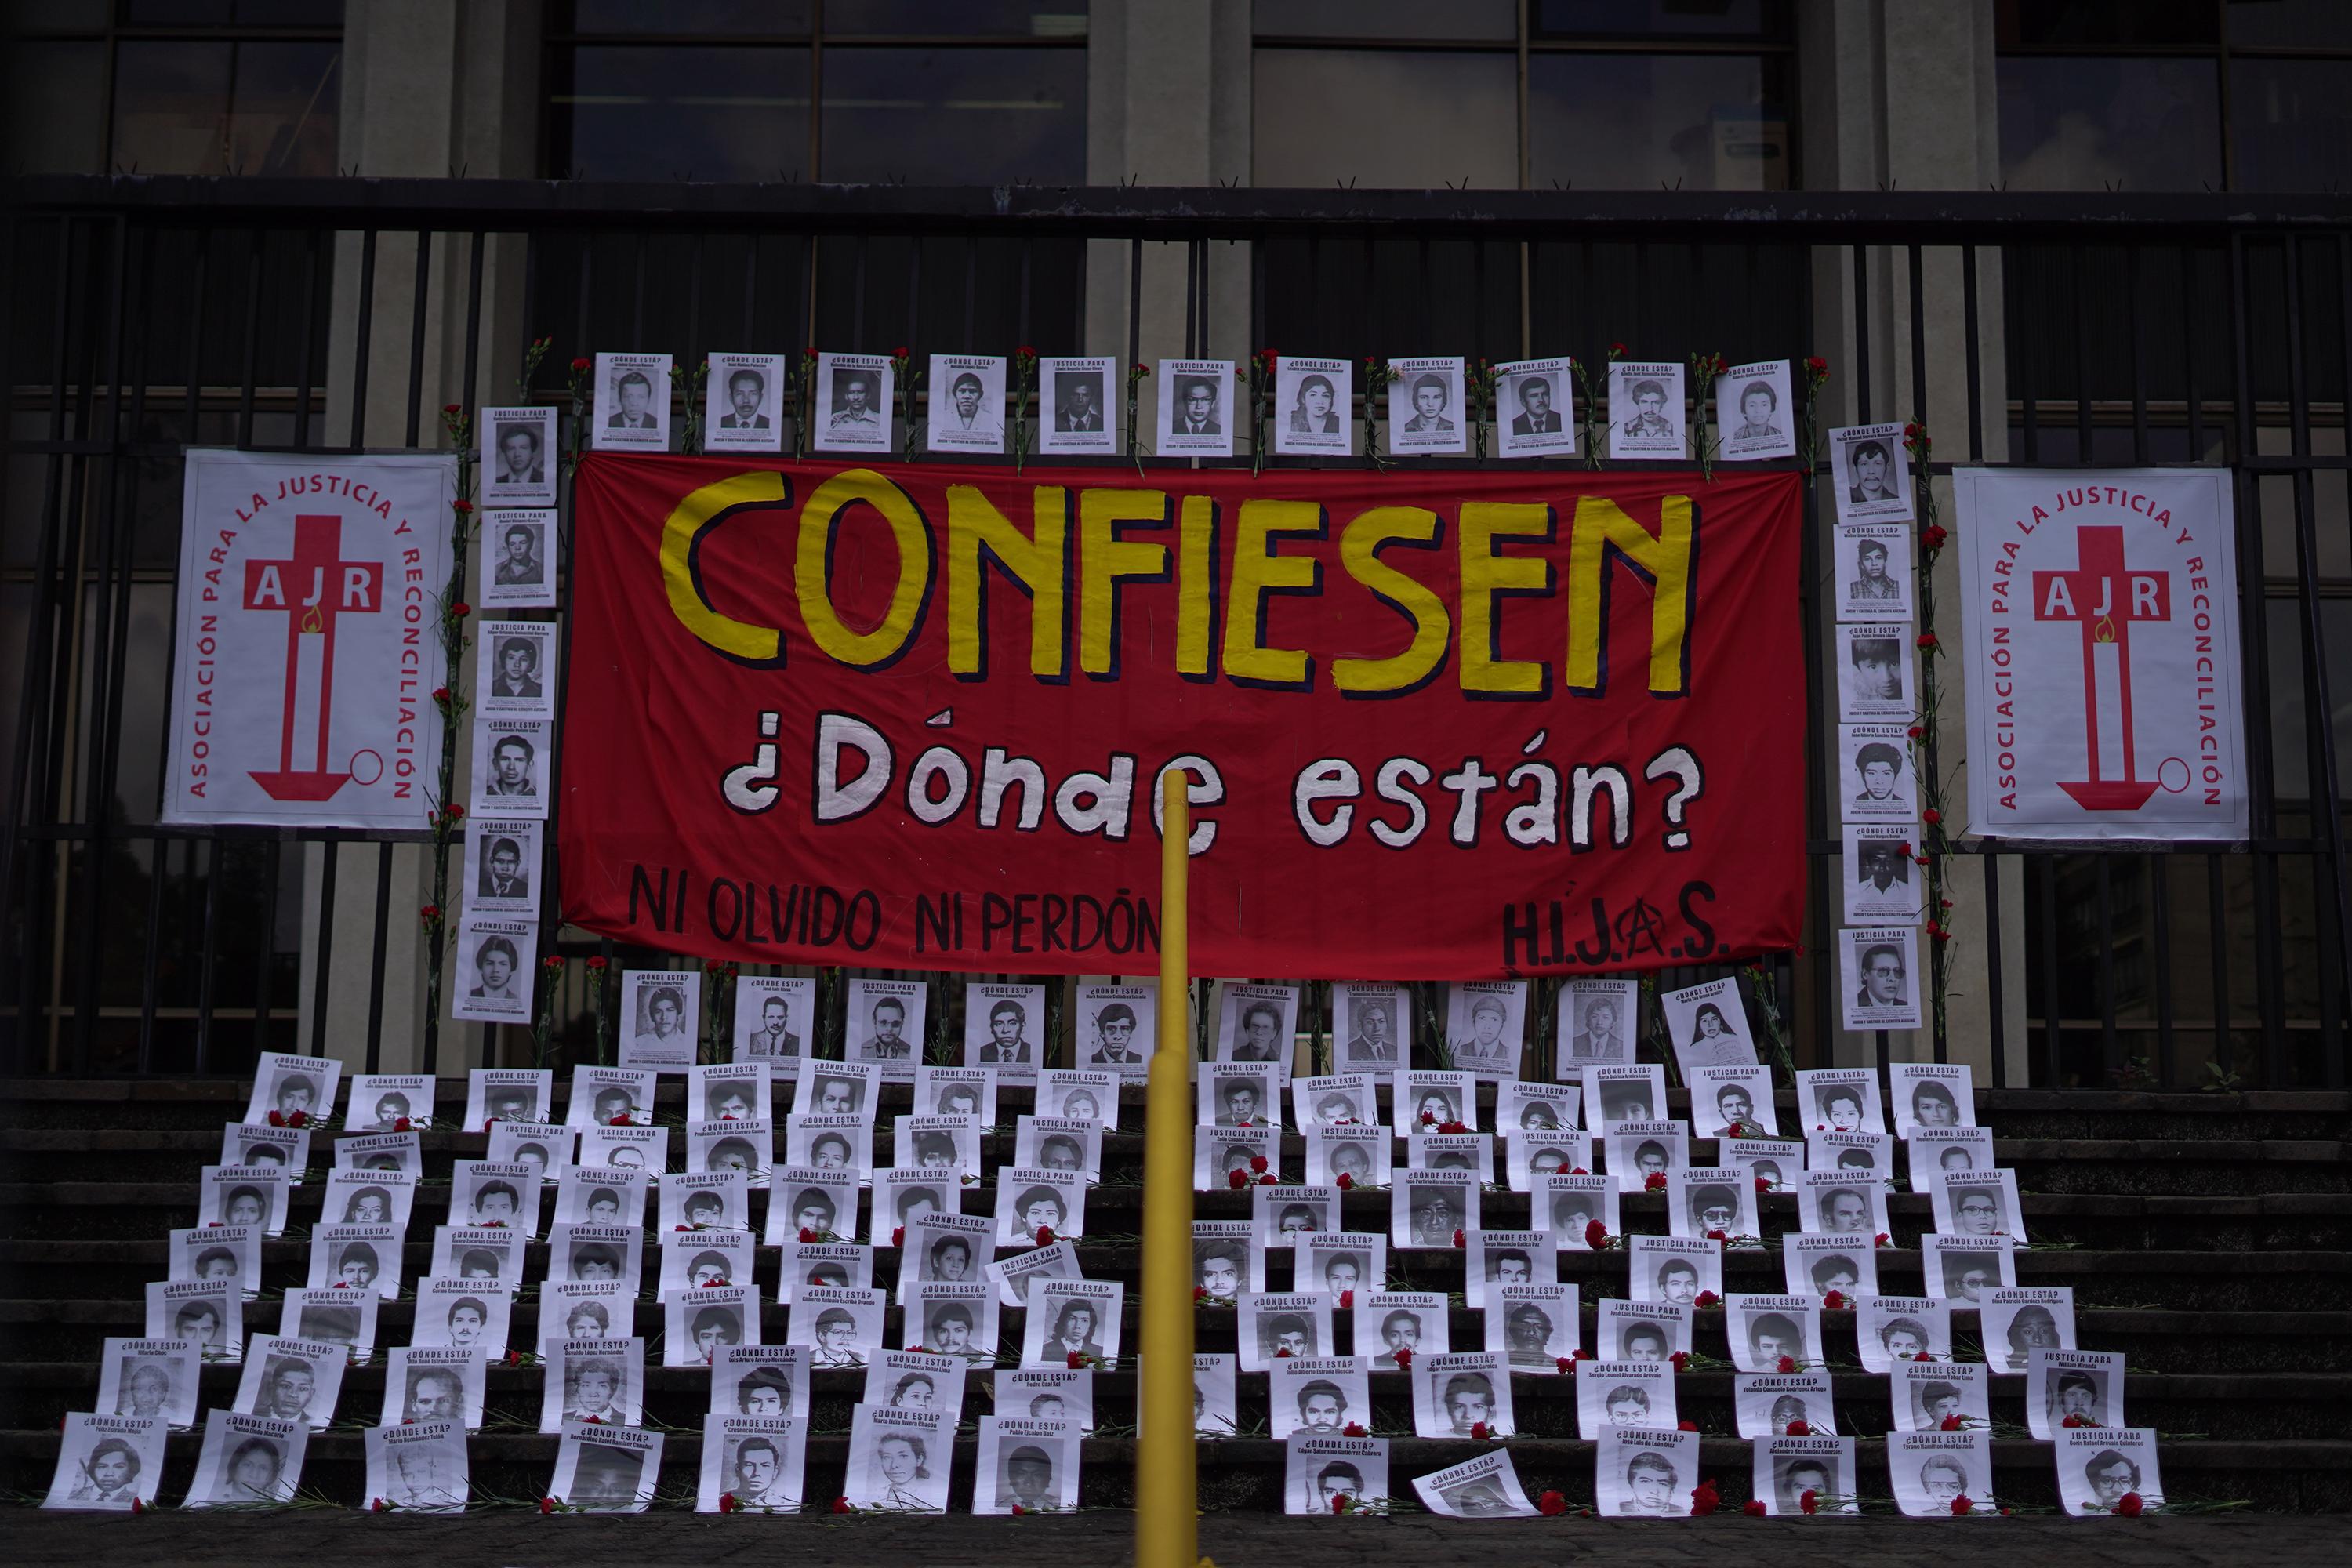 Demonstrators left a tribute to victims outside of the Palace of Justice in Guatemala City on June 7, 2021 during a hearing for the Diario Militar case, also known as the 